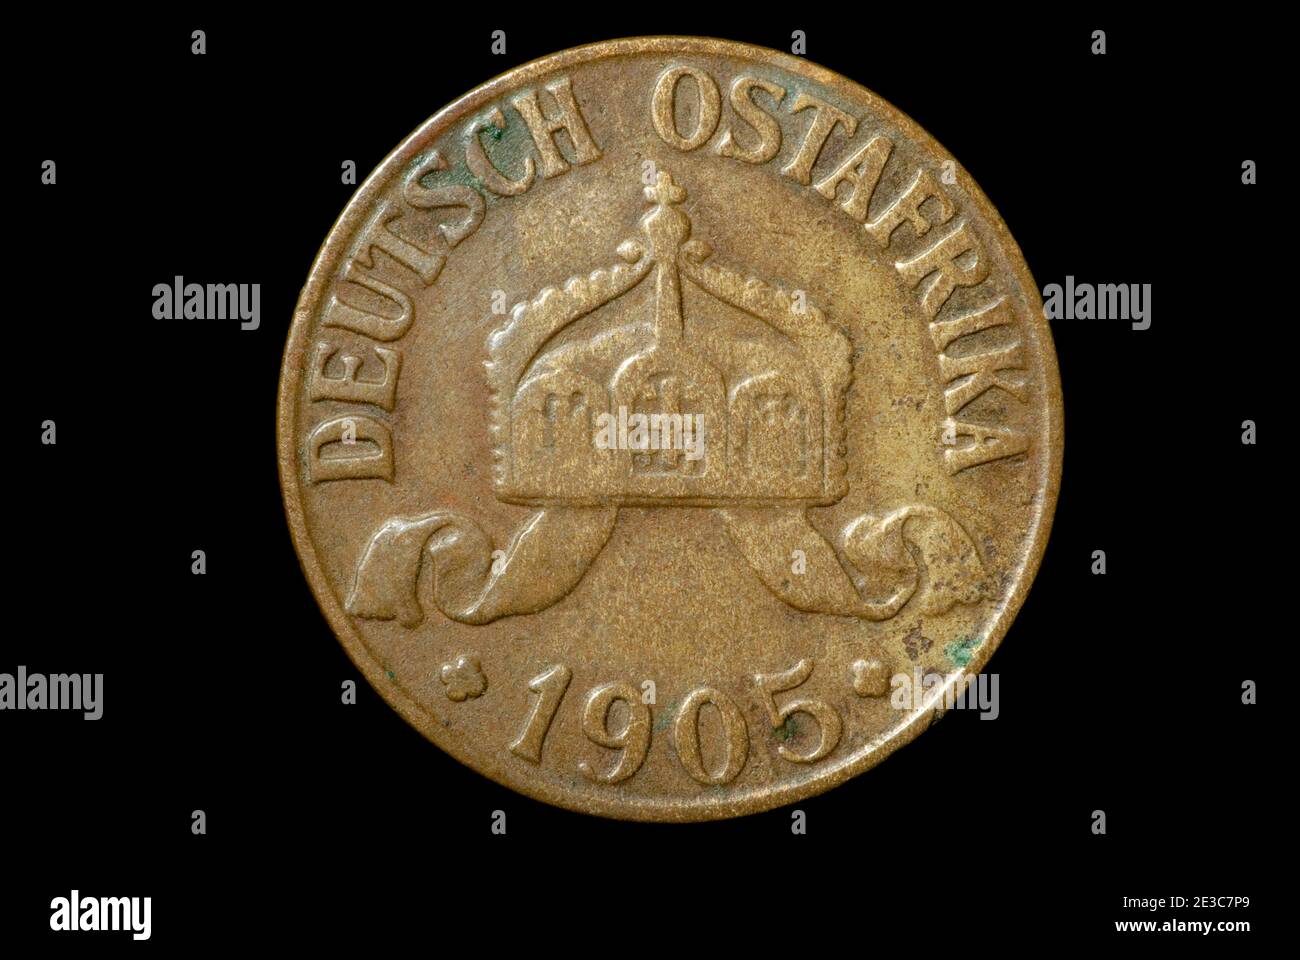 German East Africa Coin Stock Photo